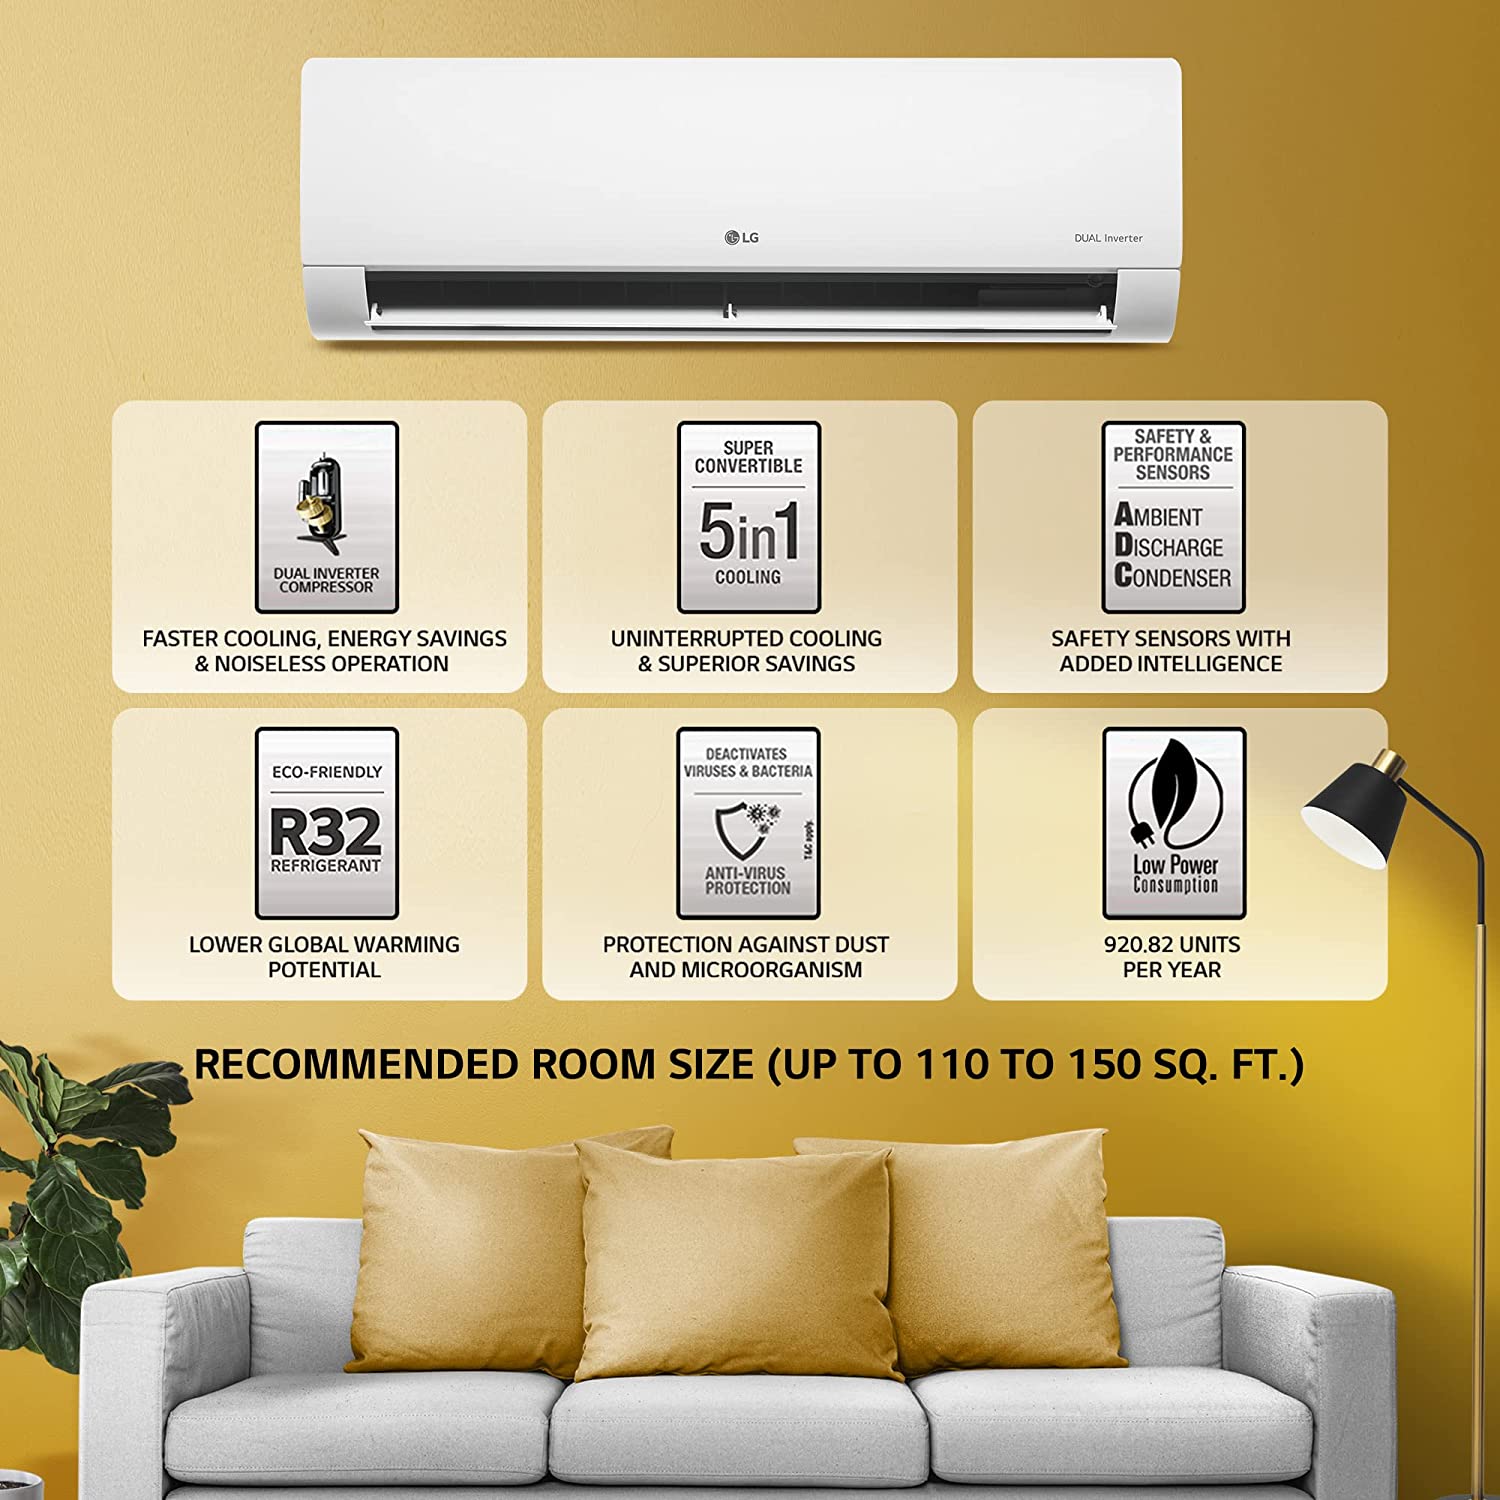 LG 1.5 Ton 4 Star DUAL Inverter Split AC (Copper, Super Convertible 5-in-1 Cooling, HD Filter with Anti-Virus Protection, 2022 Model, PS-Q19RNYE, White)